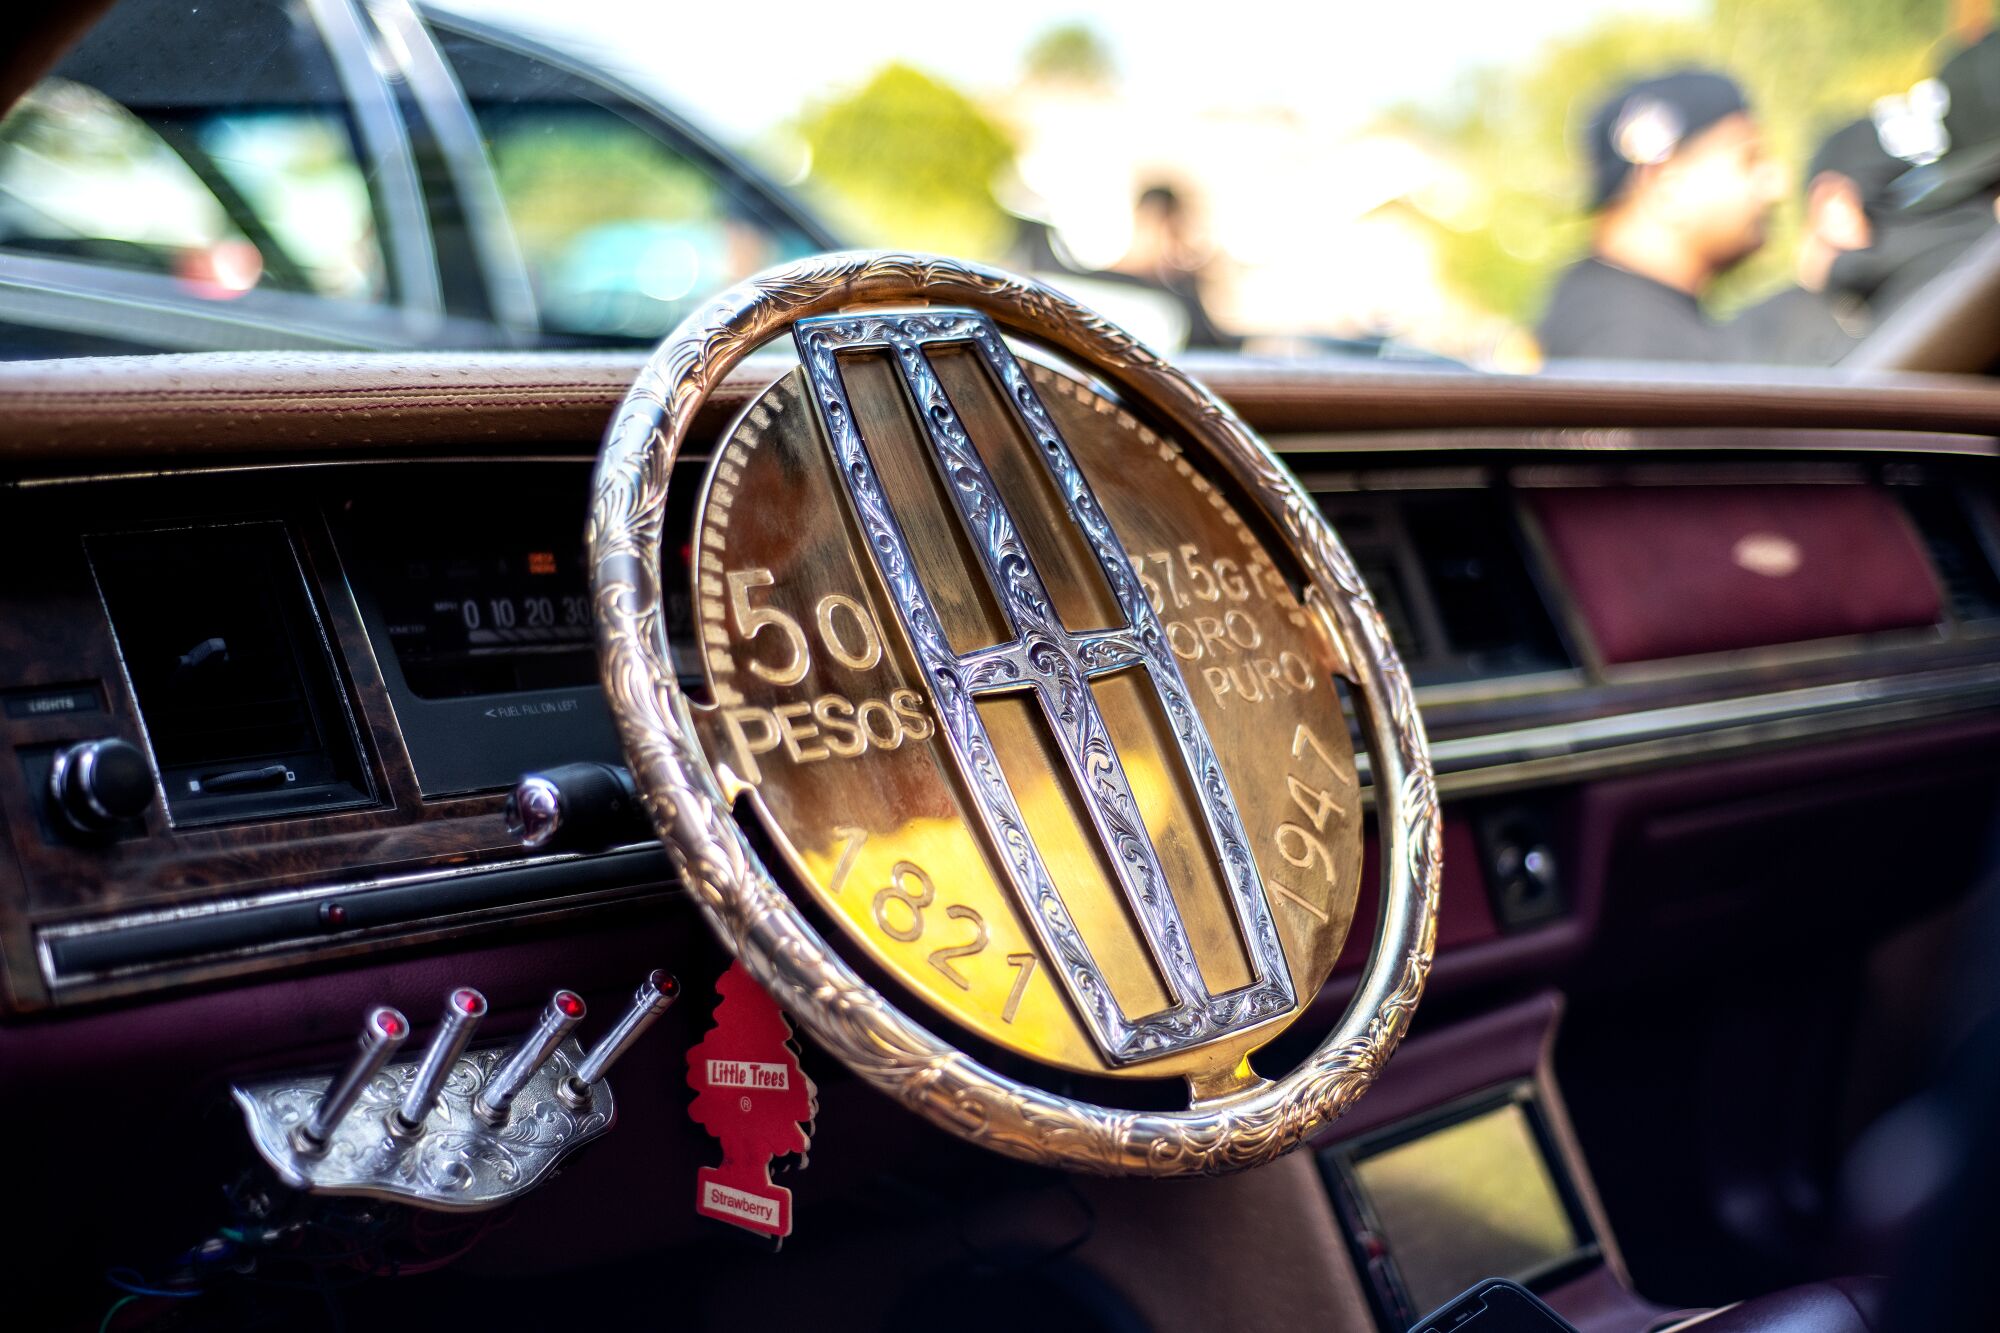 The custom gold-plated steering wheel inside Joe Arevalo's 1991 Lincoln Town Car.